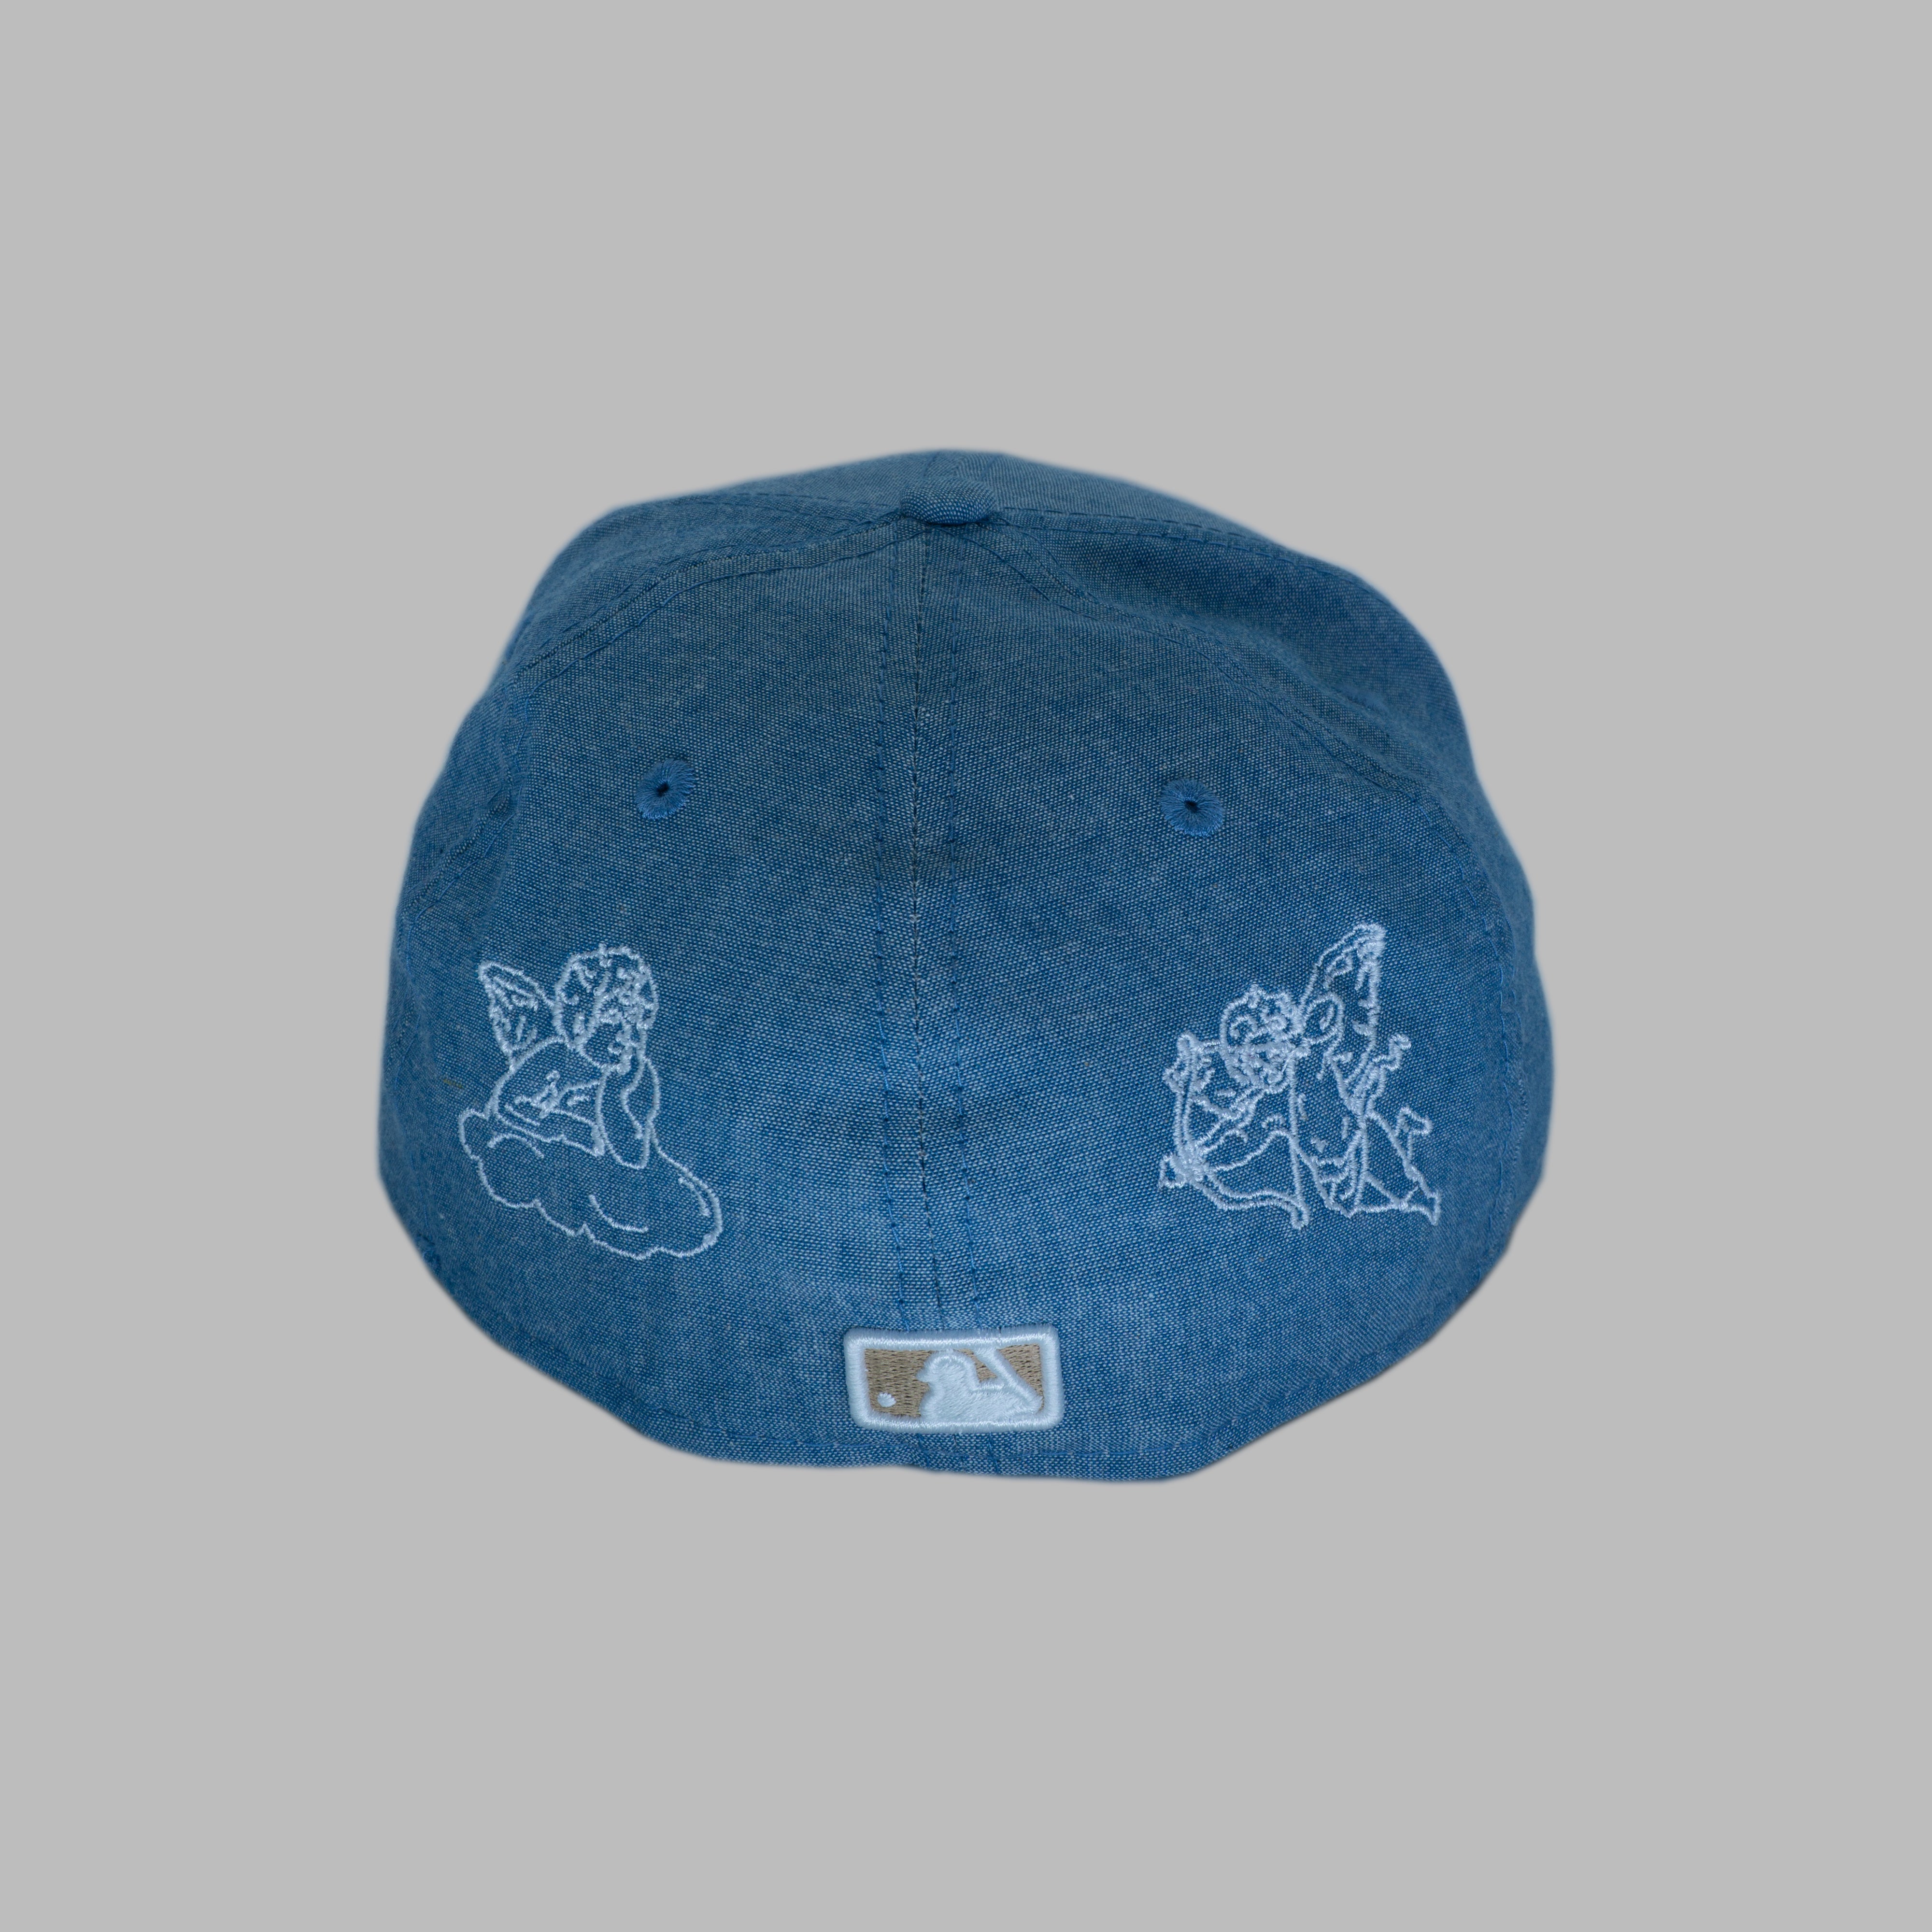 BLUE HOLY FITTED (size 7 1/4)